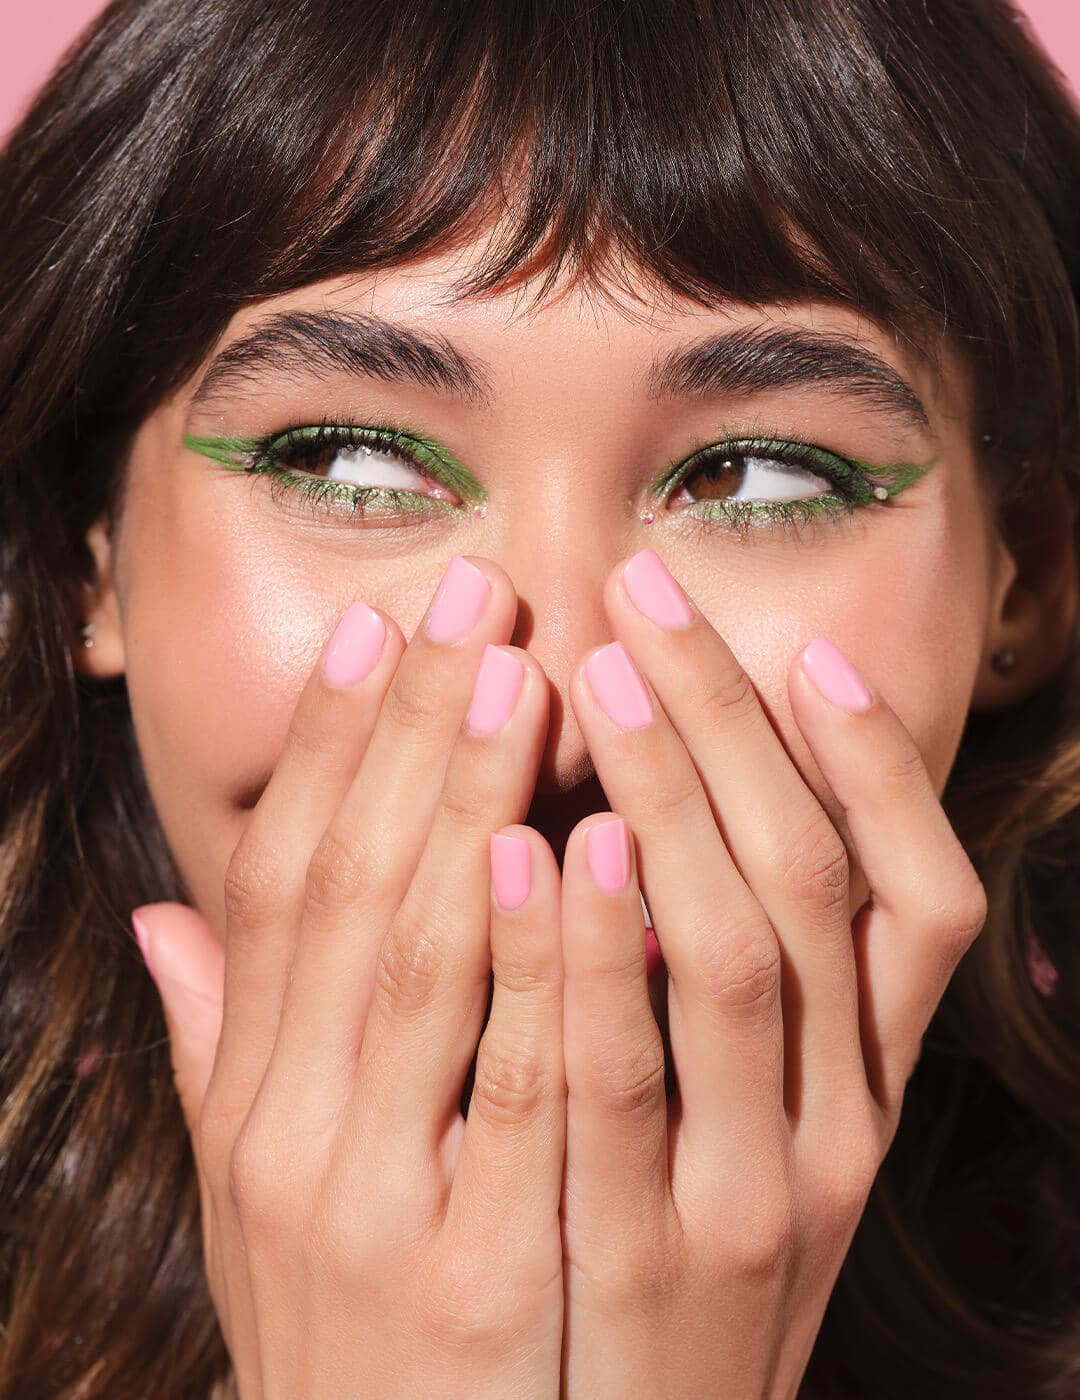 Close-up of a model rocking a bold green eyeliner makeup look and covering half of her face with her hands